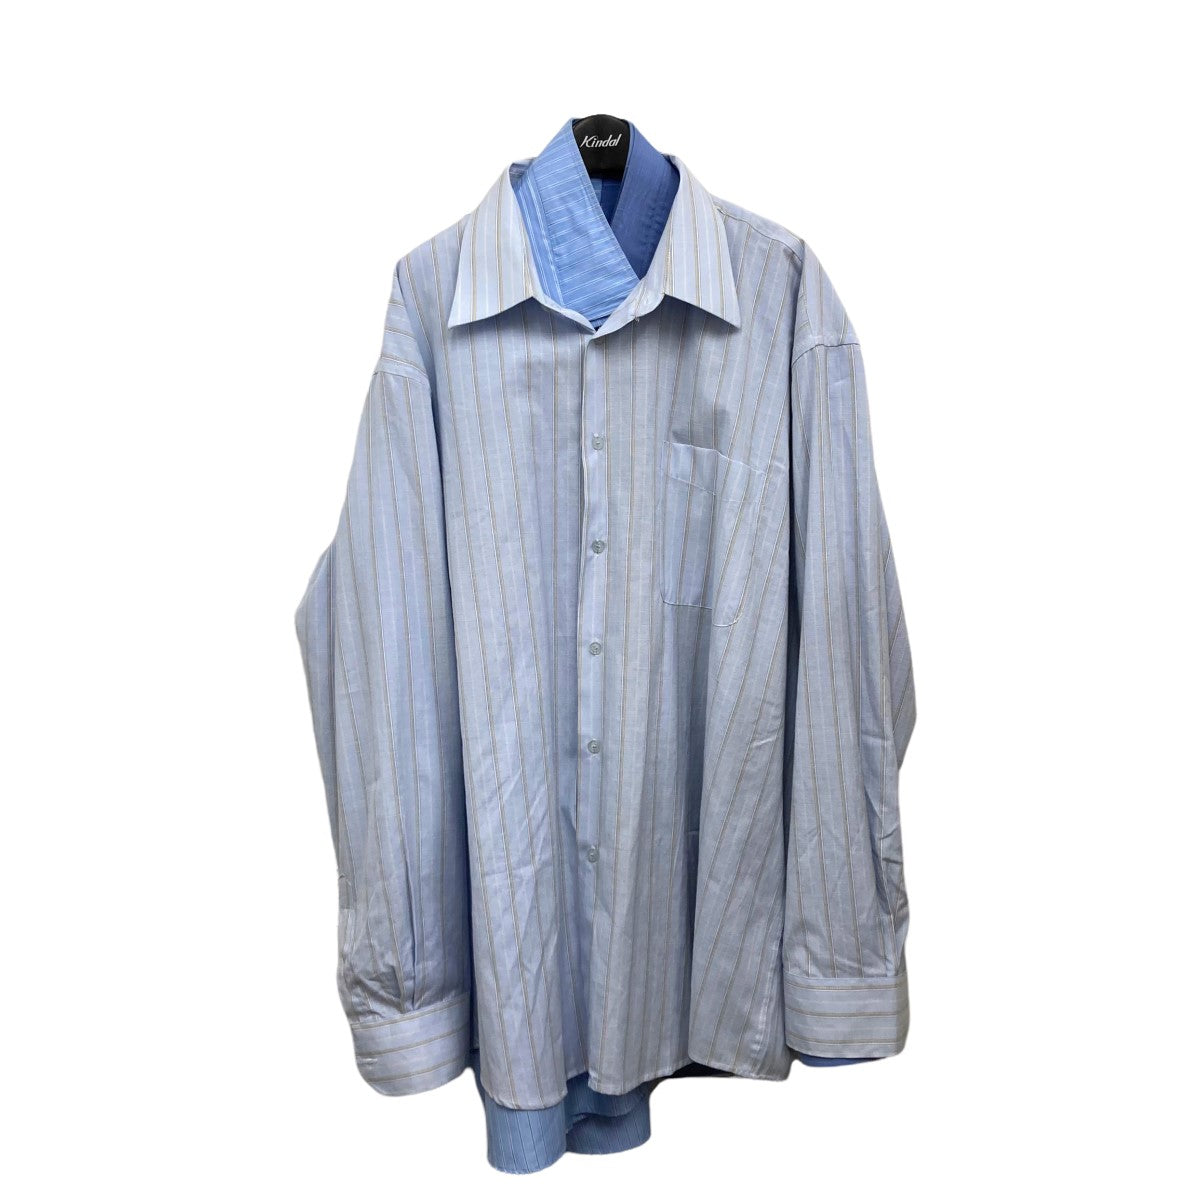 HED MAYNER 22aw pleated shirt ストライプシャツ素材